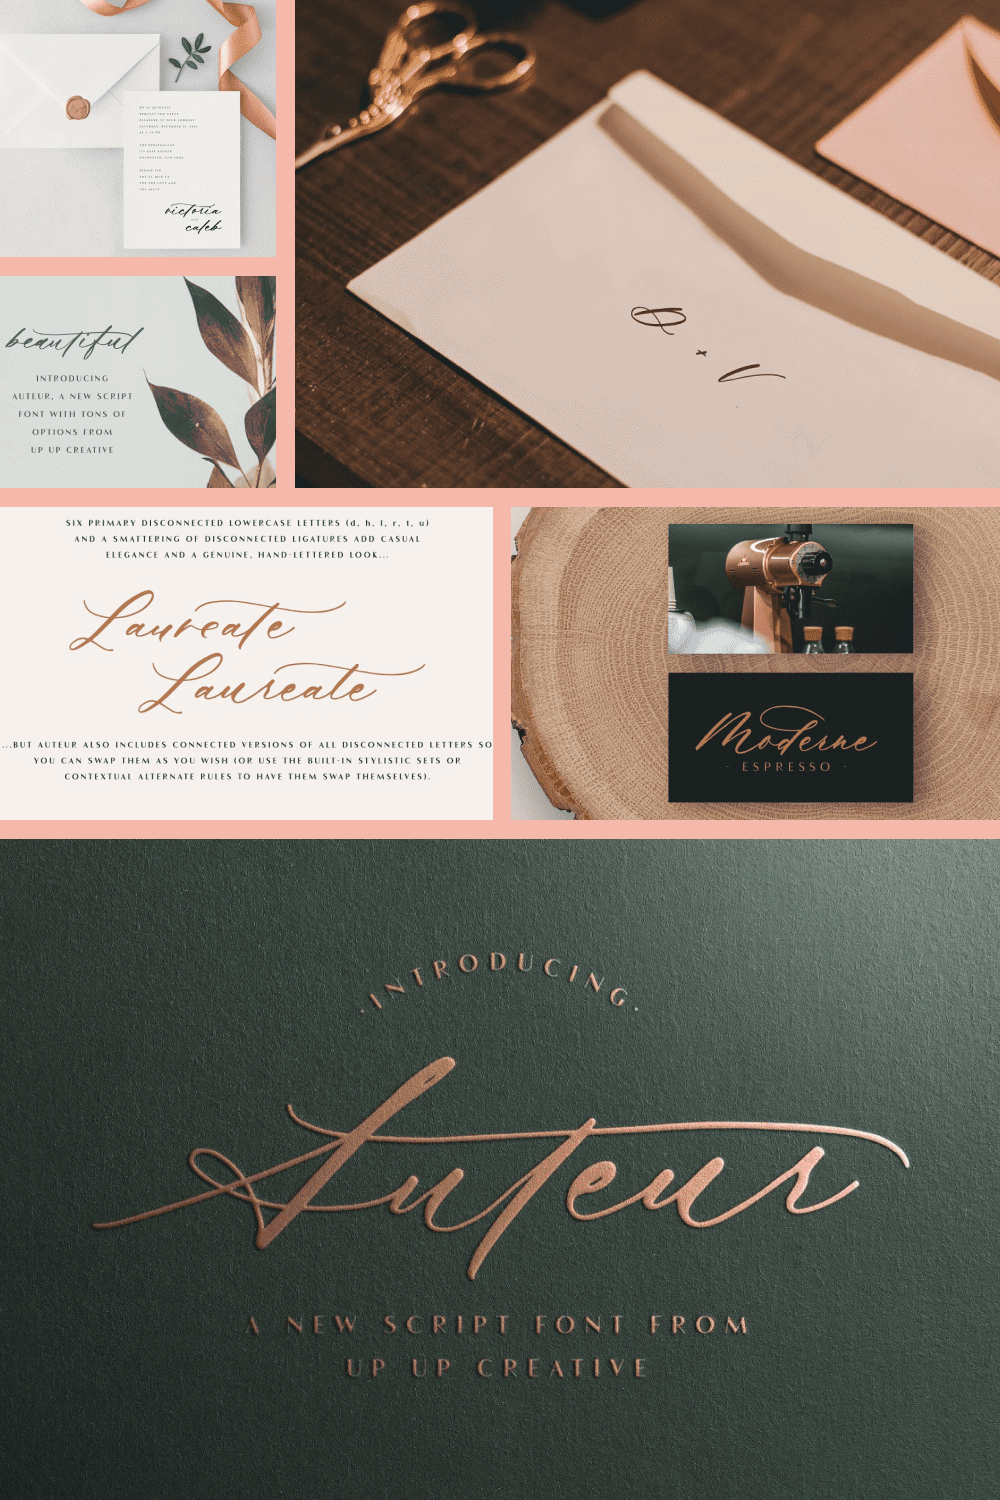 This is a very nice font. Embossed gold lettering on a matte background.